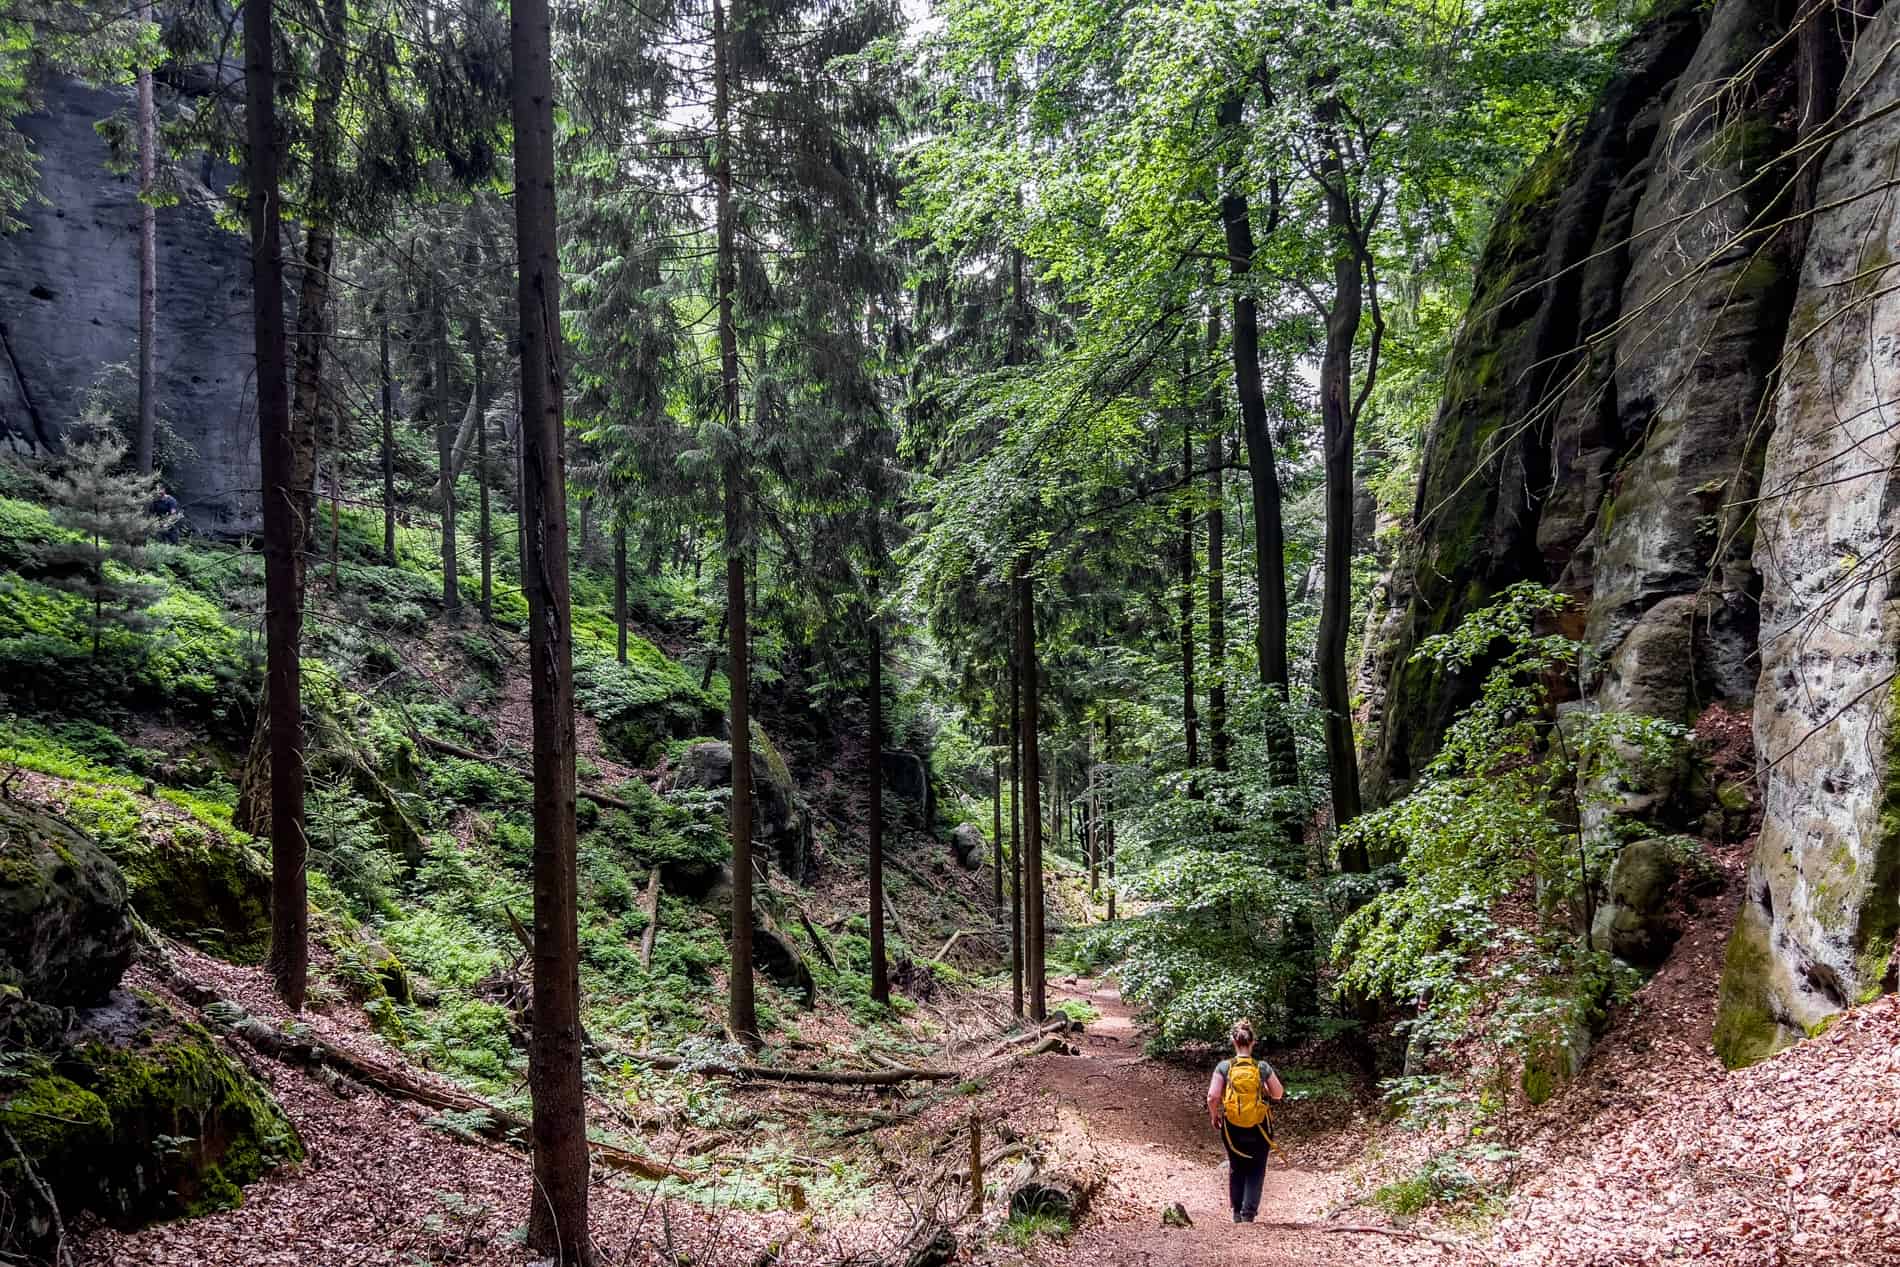 A woman hiking on an ochre pathway through the dense and rock walled Bohemian Switzerland forest.